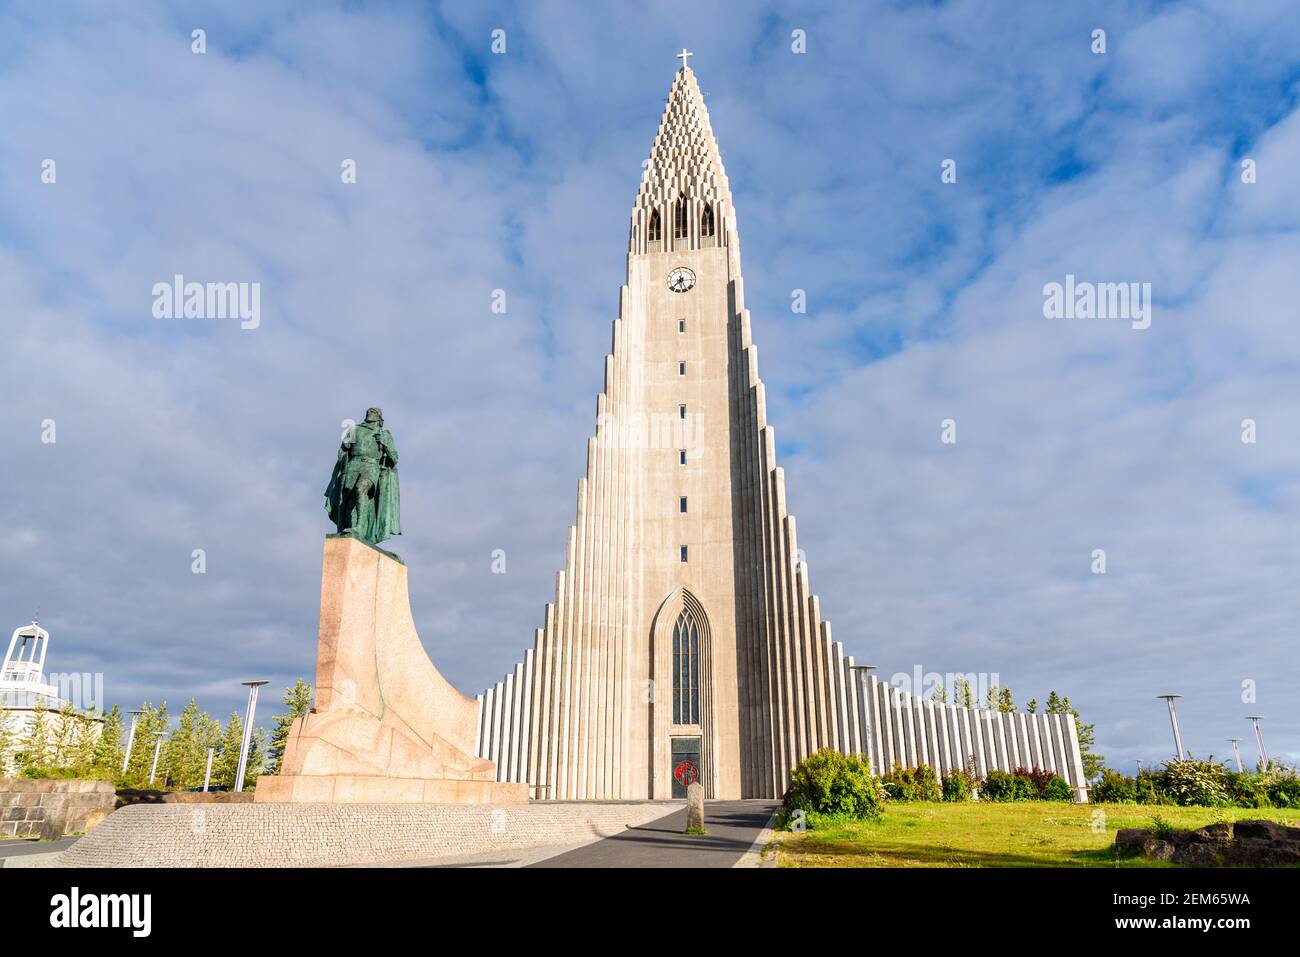 View of Hallgrimskirkja church with statue of Leif Eriksson in foregrond in central Reykjavik, Iceland, on a sunny summer evening Stock Photo